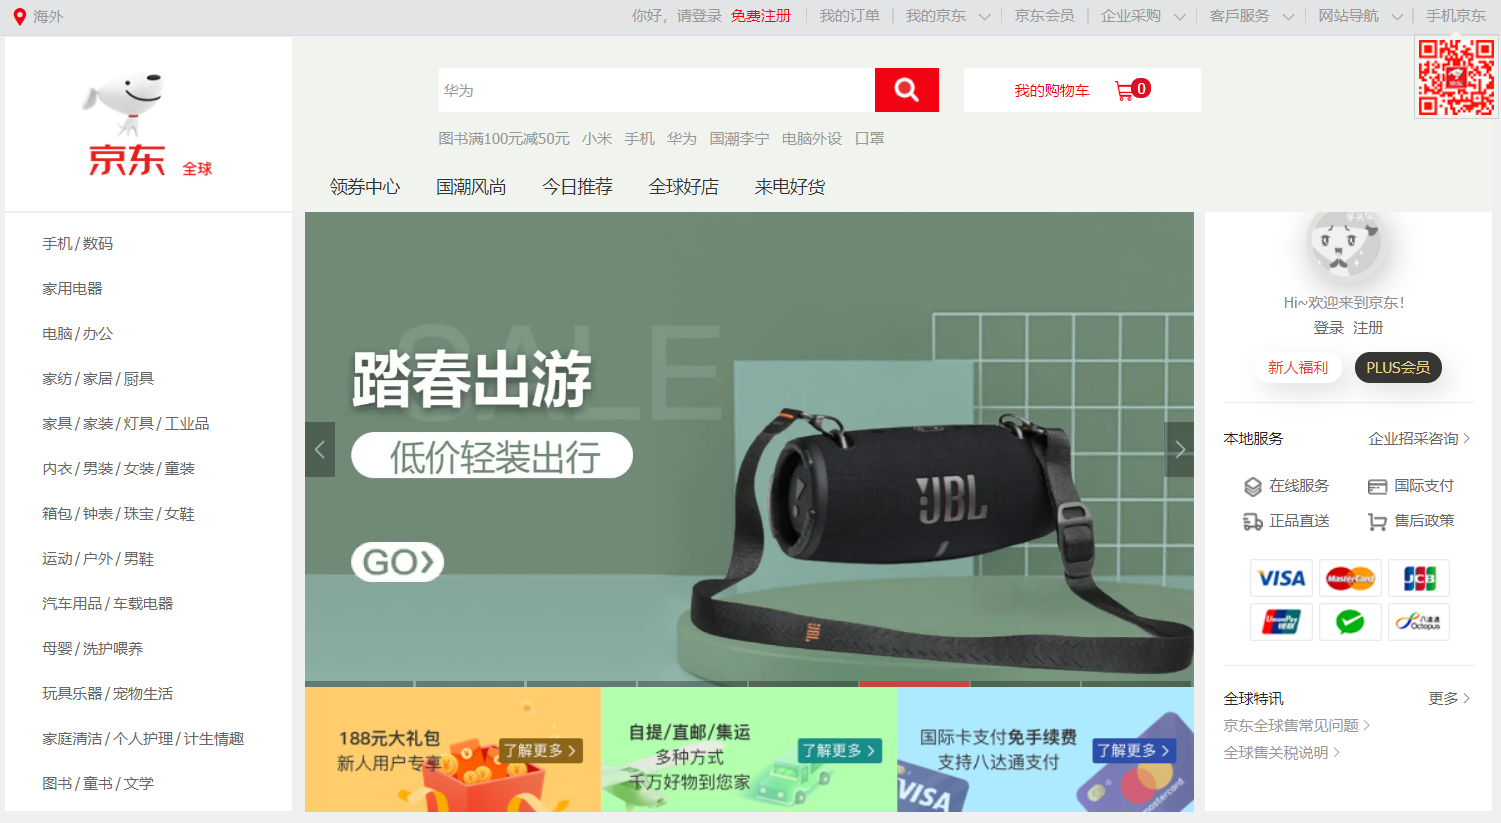 JD is one of the best sites like Alibaba